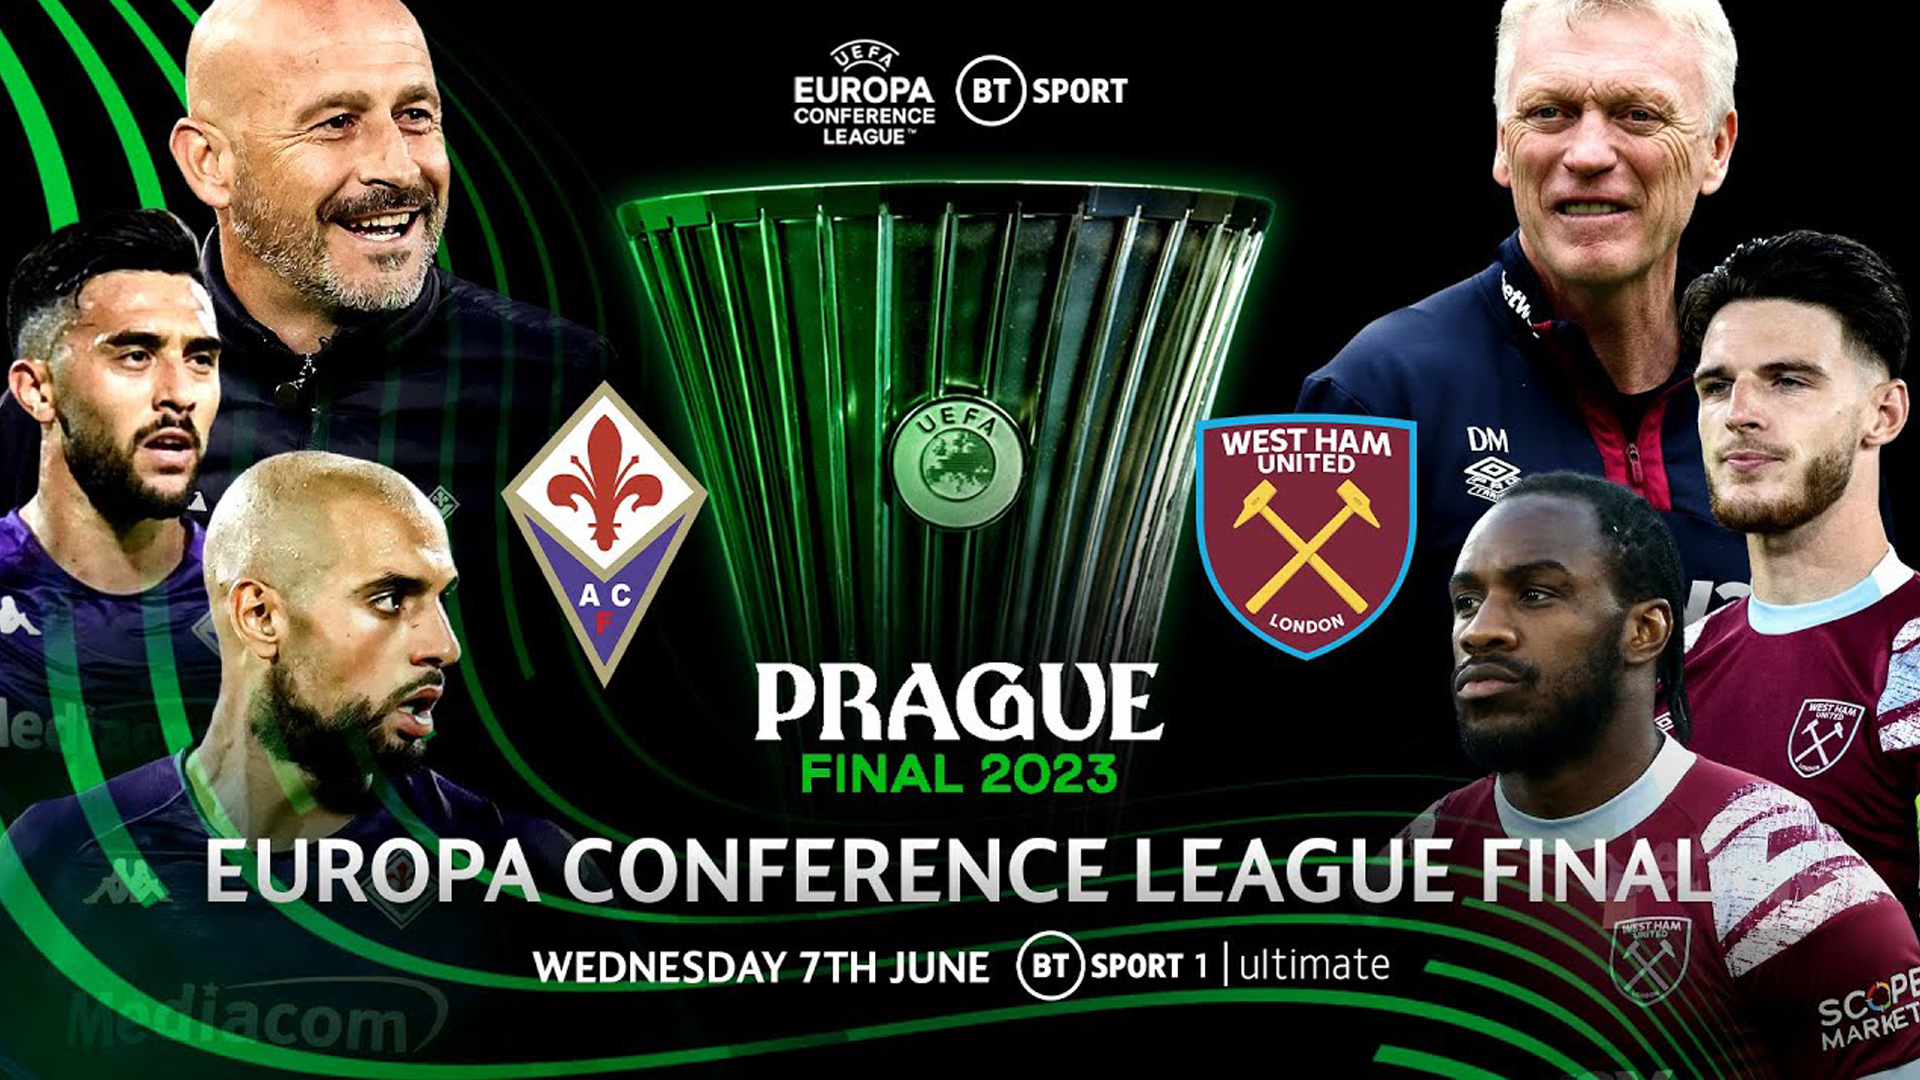 WATCH Europa Conference League final 2023 in 4k for FREE - Fiorentina vs West Ham United - Live!!